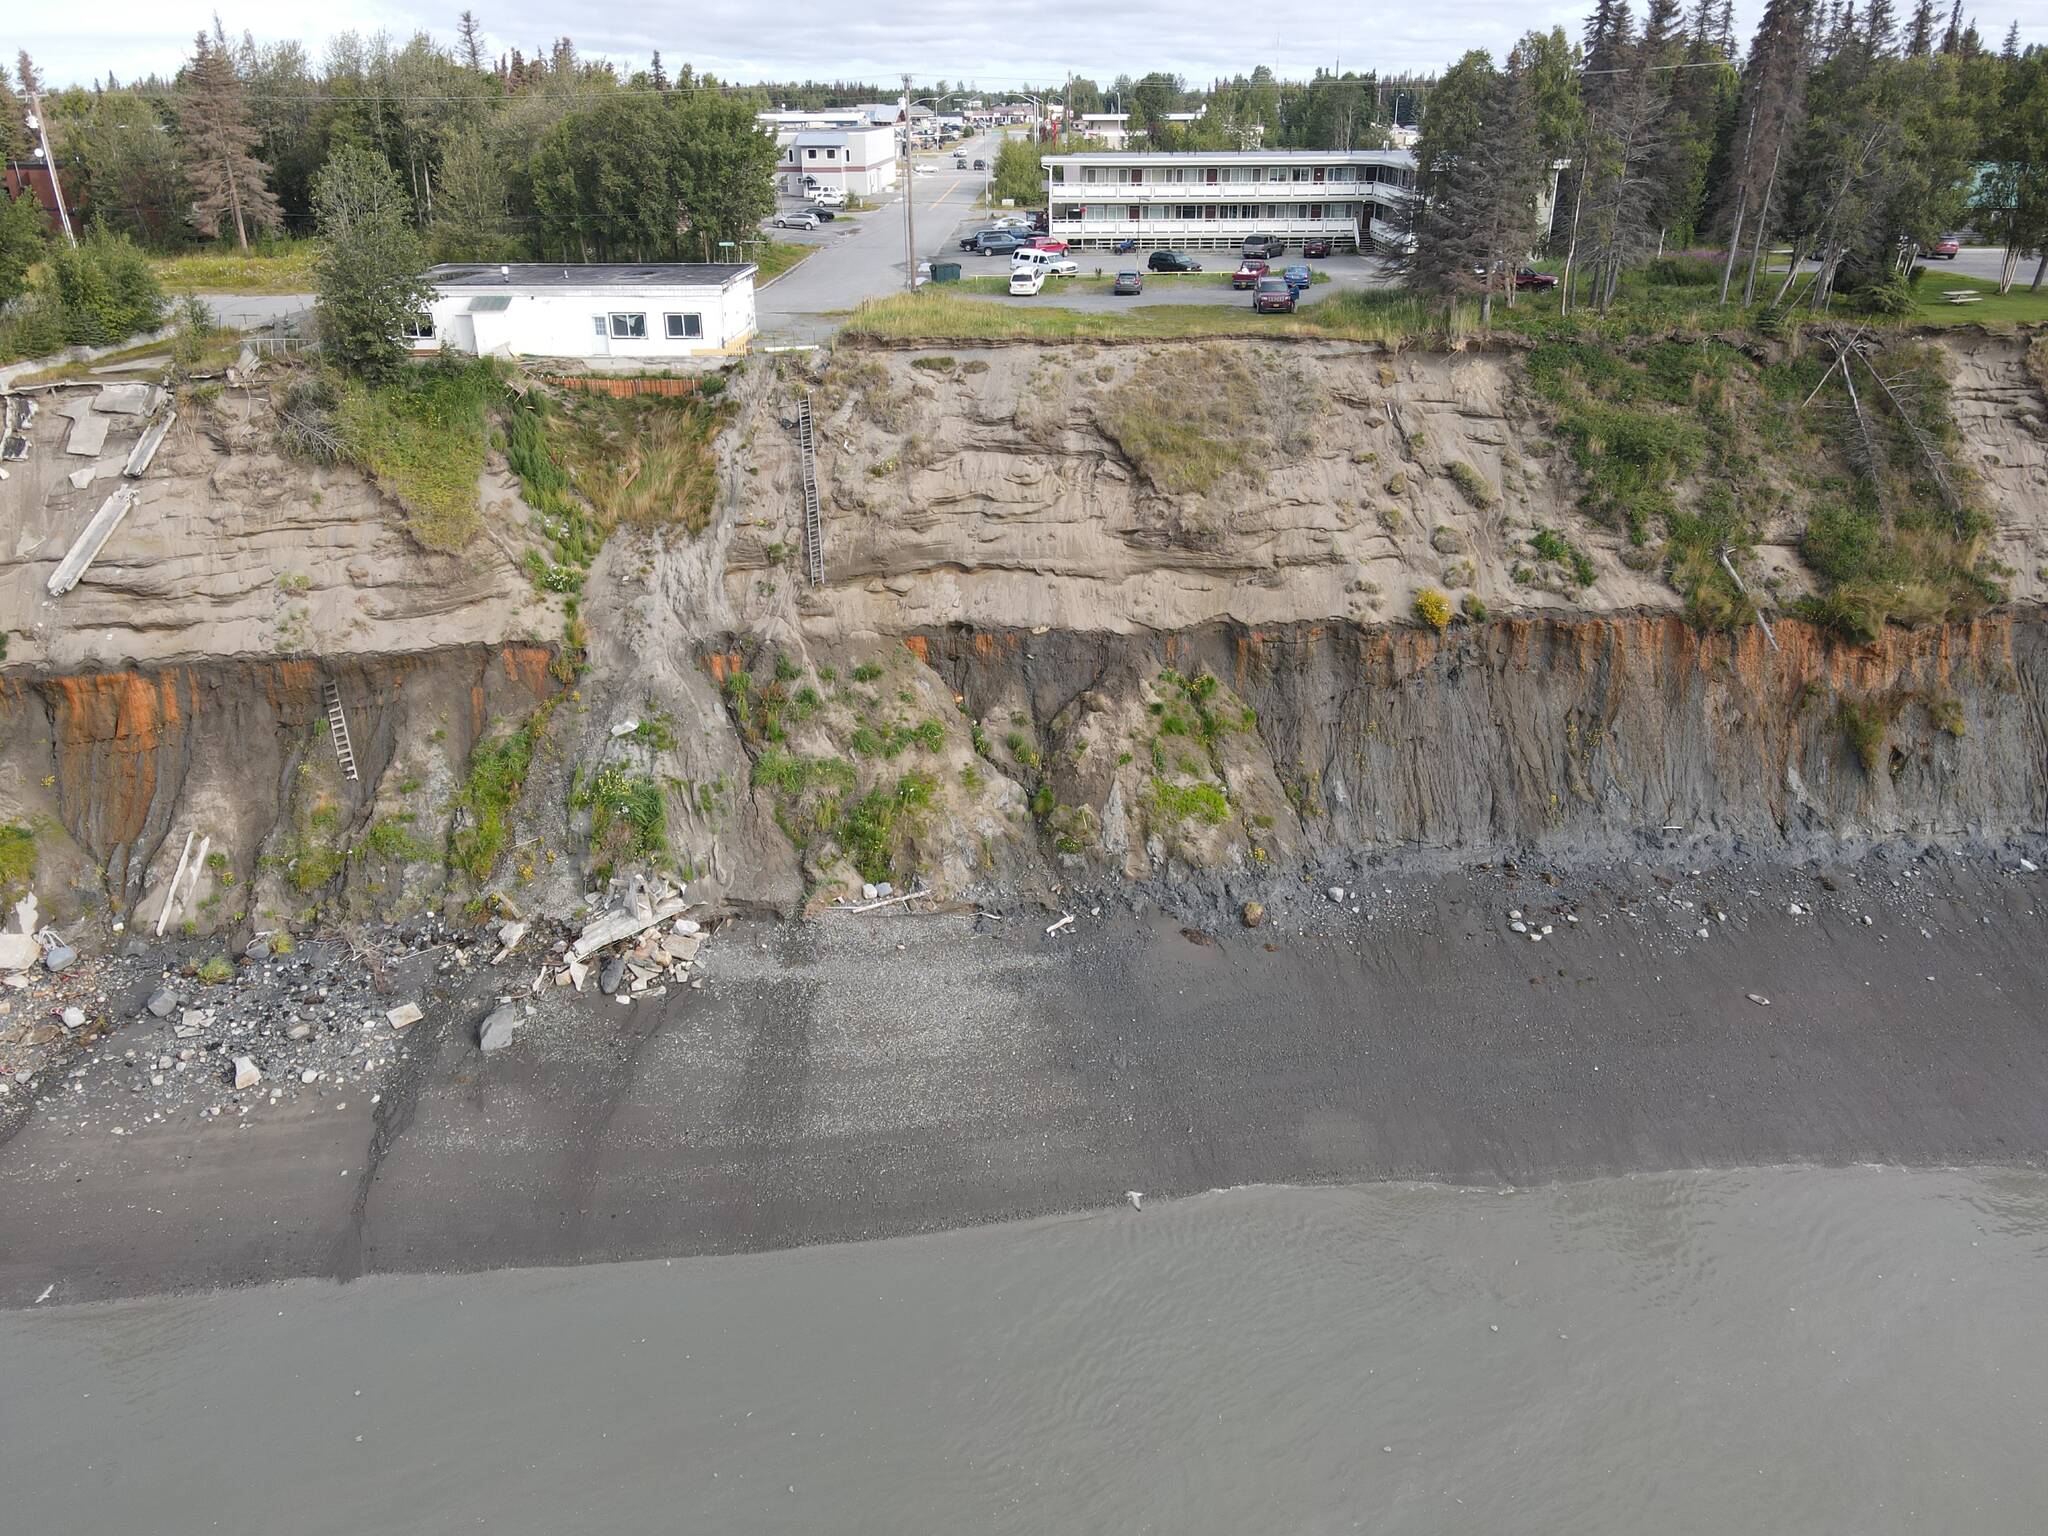 Portions of the Kenai bluff can be seen eroding below Old Town Kenai in this undated photo. (Photo by Aidan Curtin/courtesy Scott Curtin)